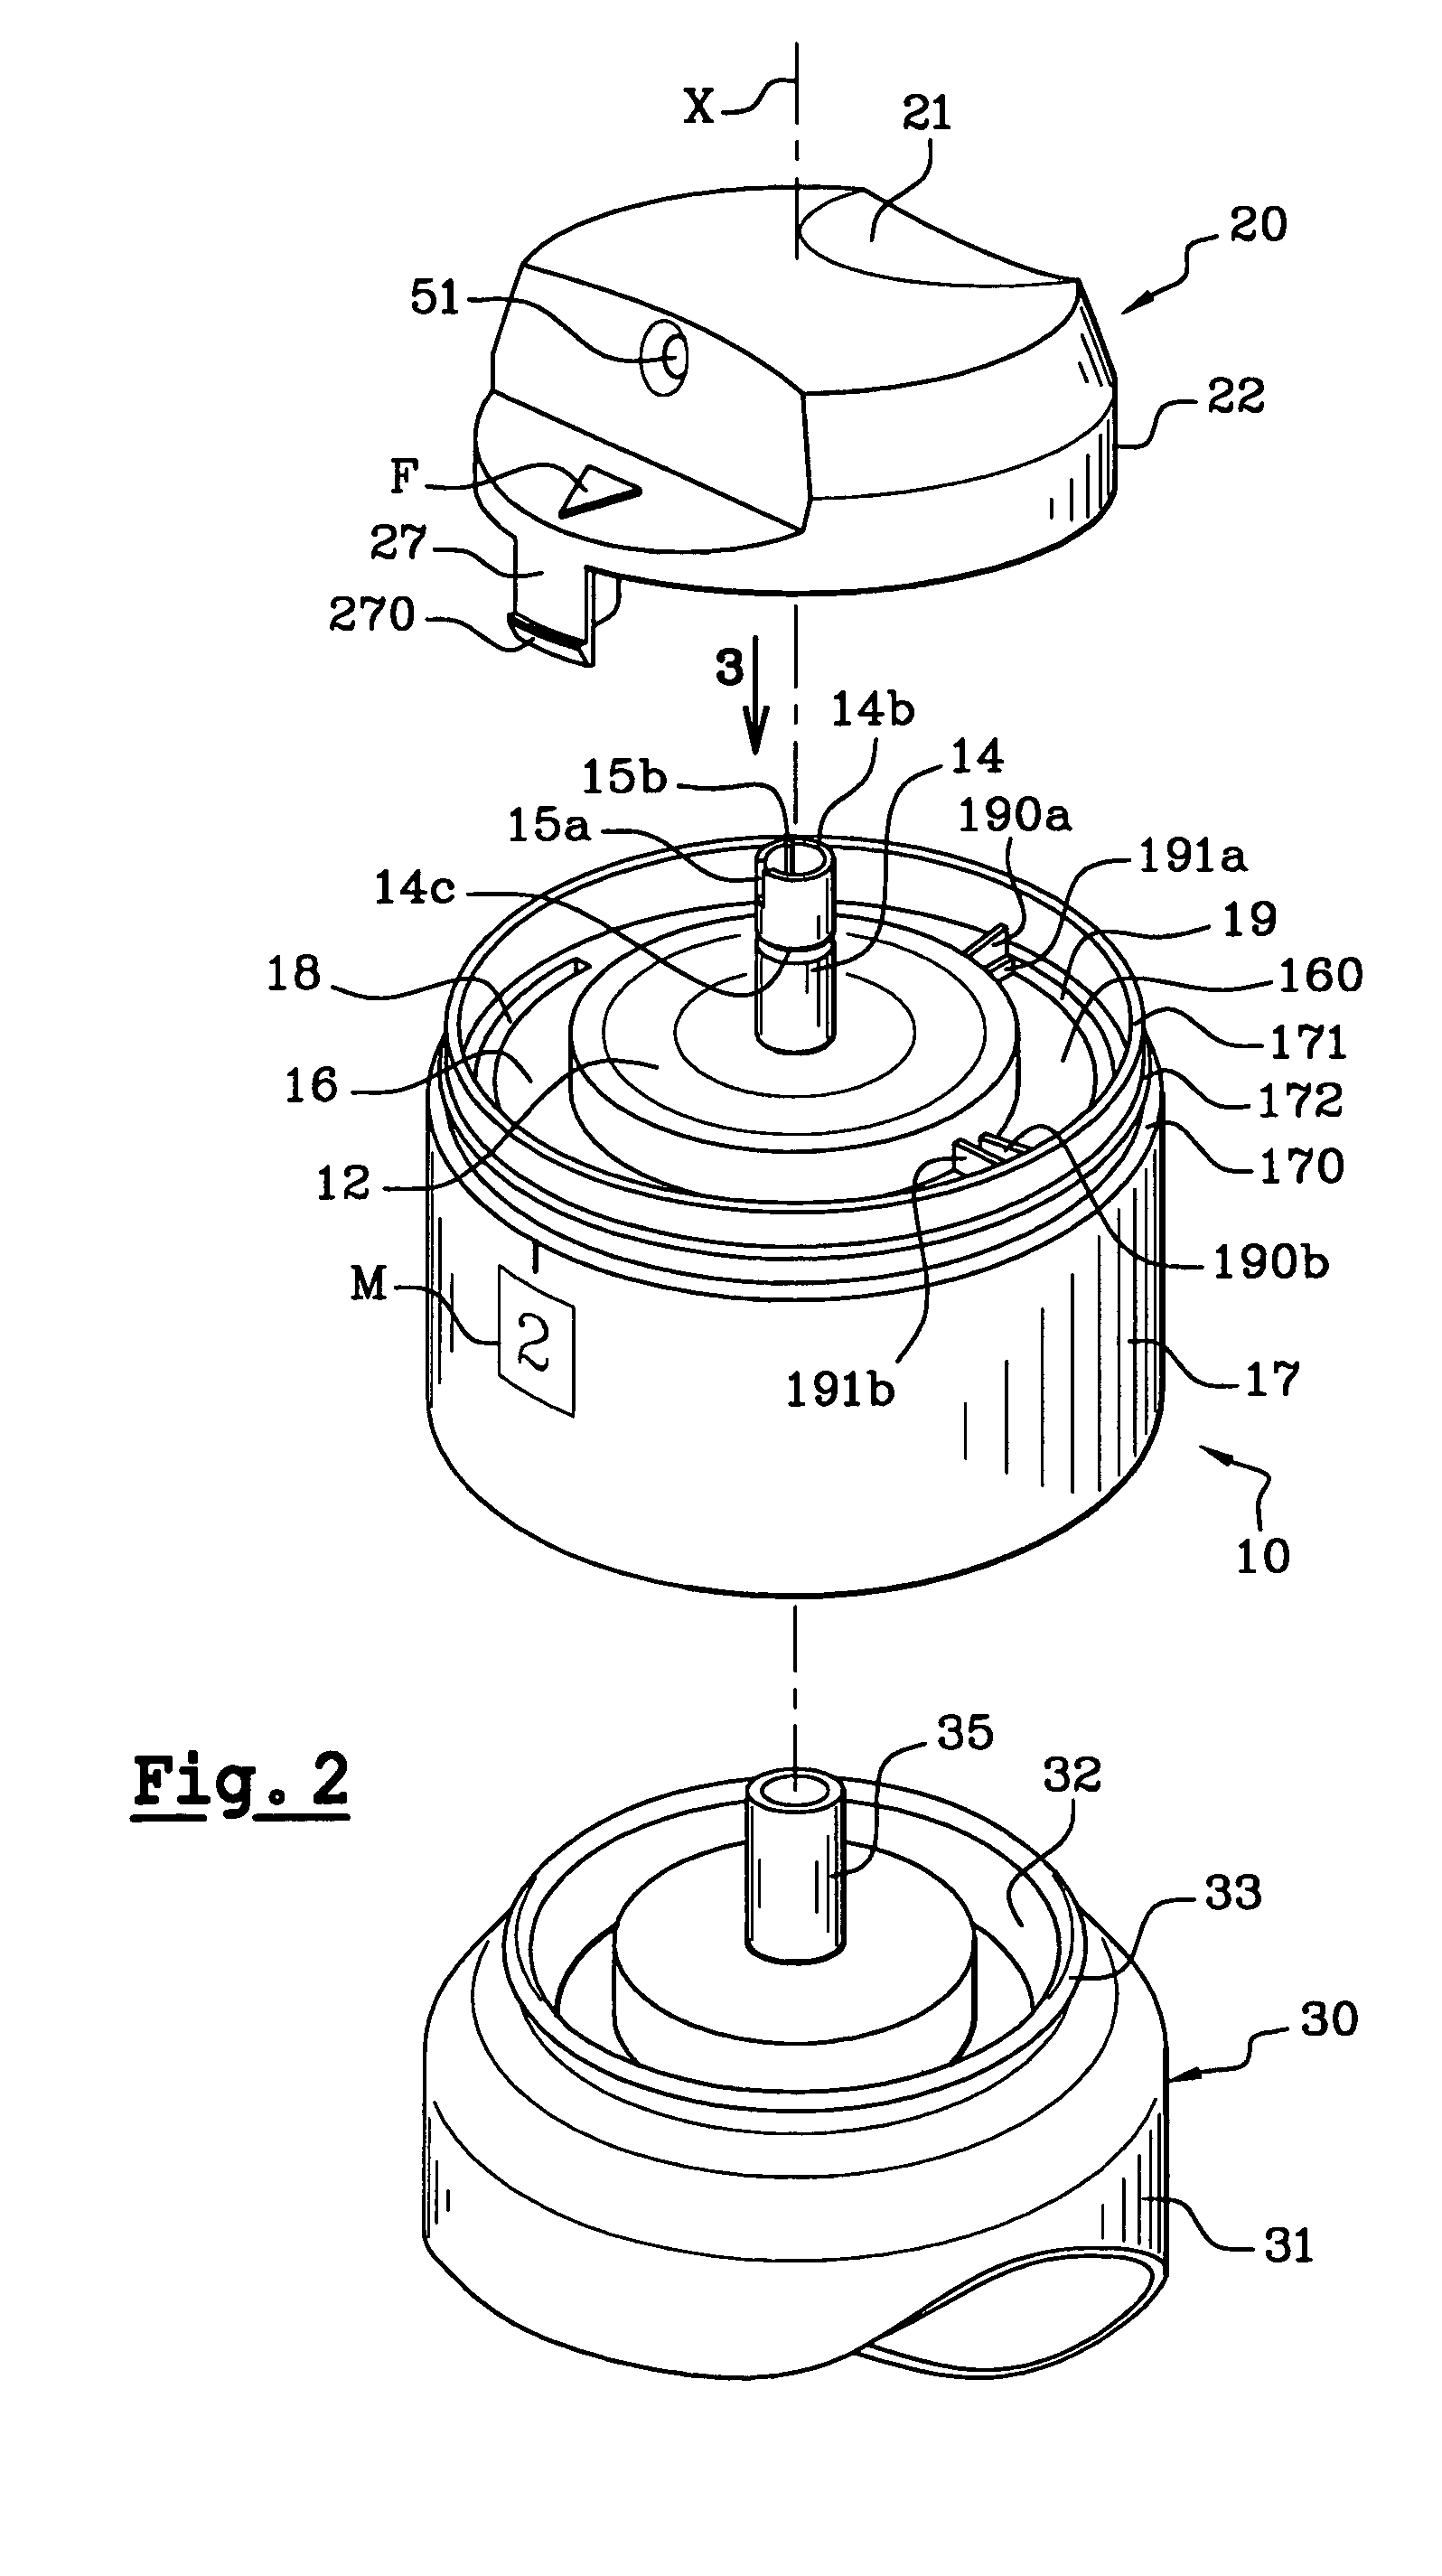 Product dispensing head and packaging with variable flow